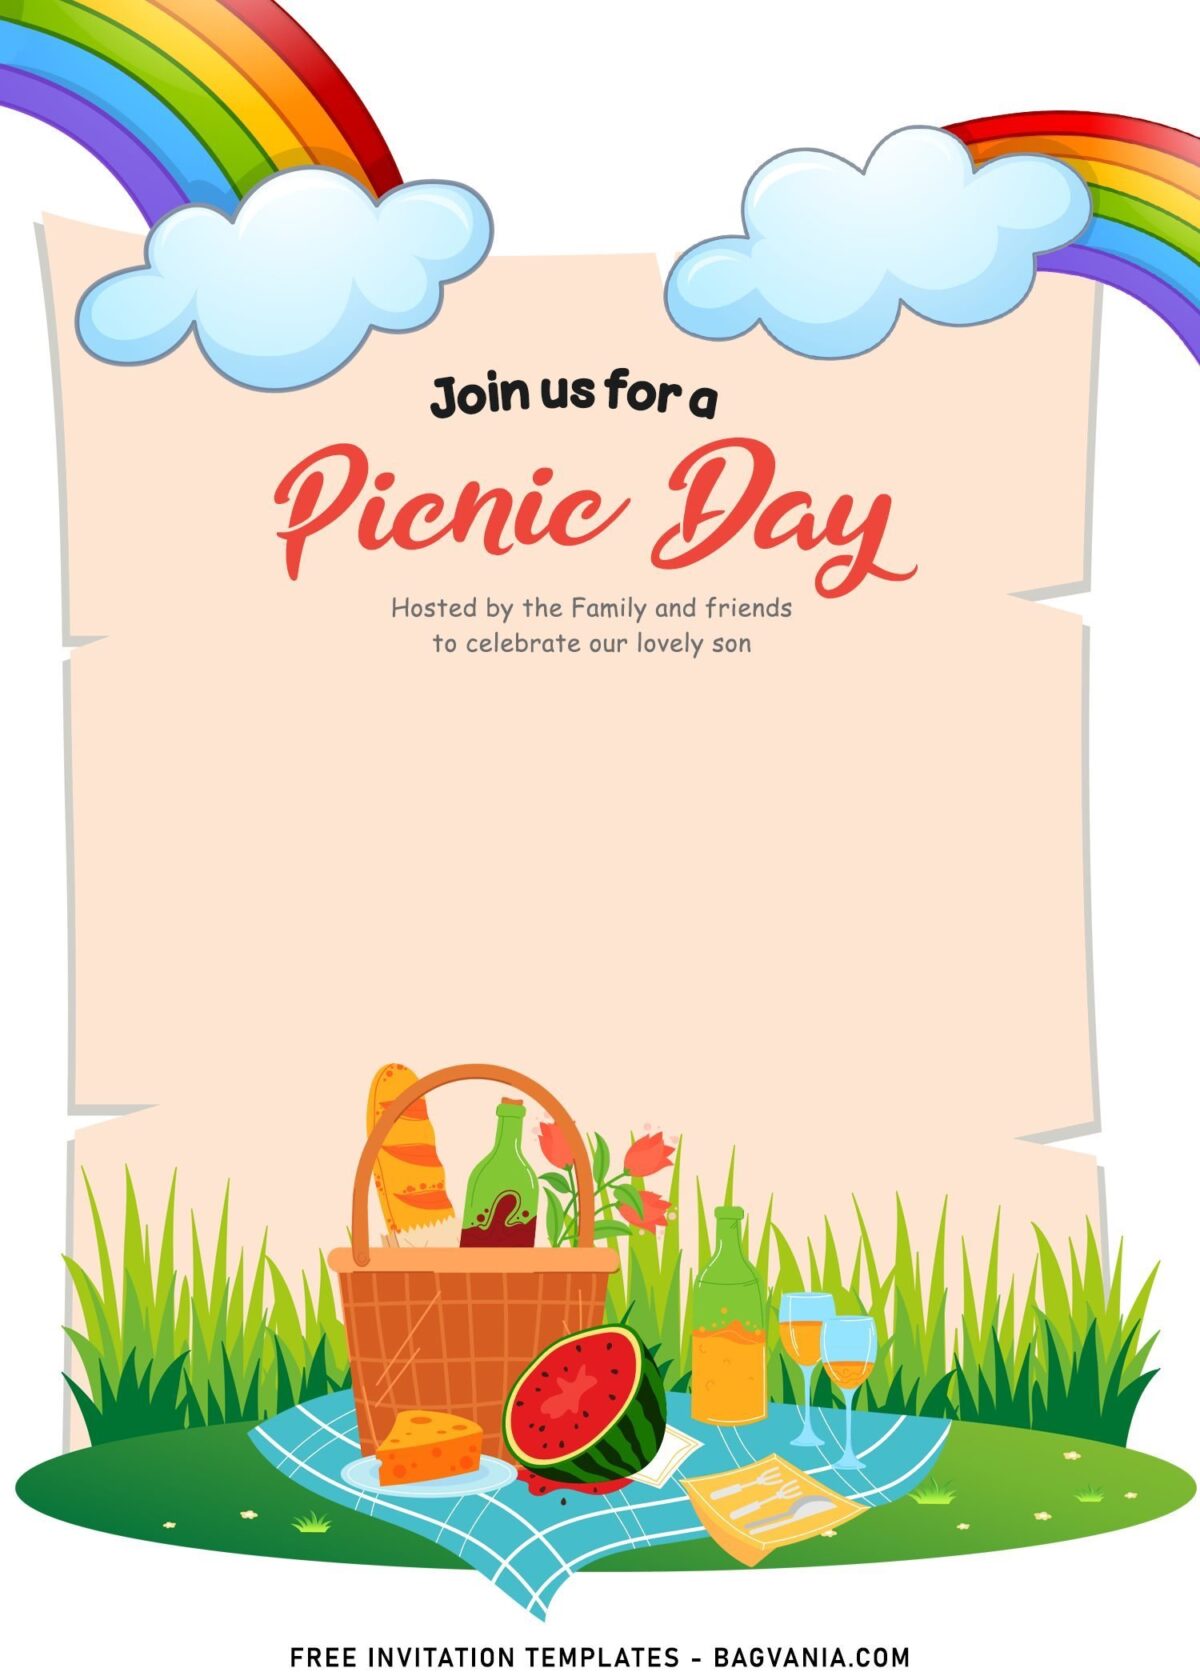 11+ Kids Picnic Day Birthday Invitation Templates Perfect For Spring with picnic basket